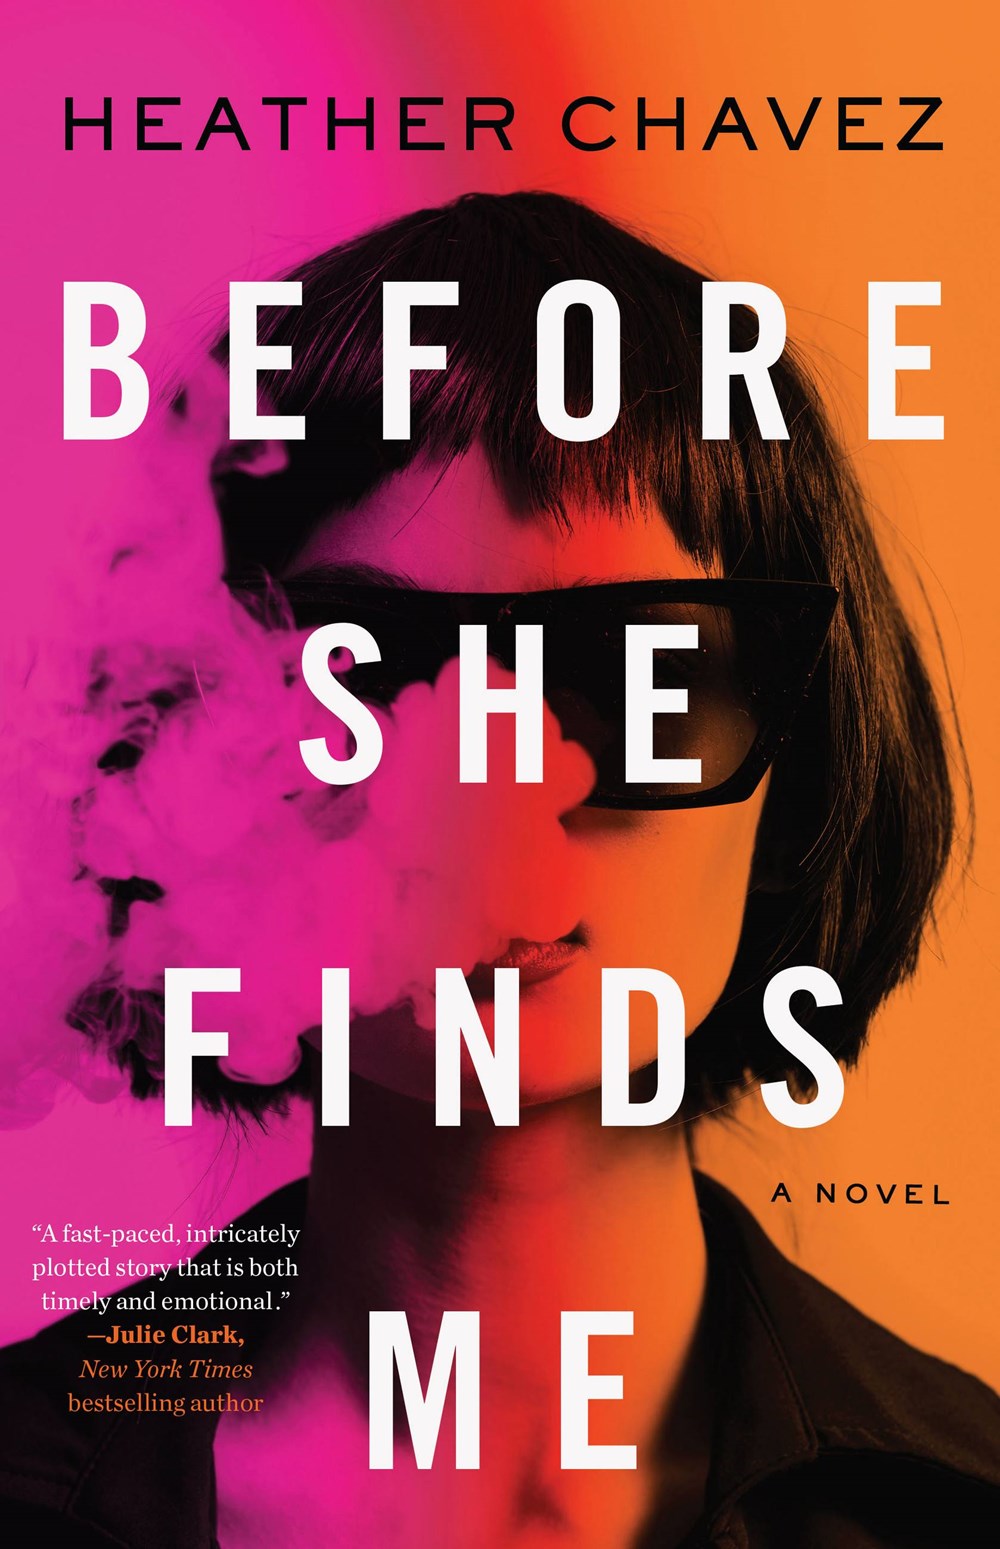 Before She Finds Me by Heather Chavez (Hardcover)